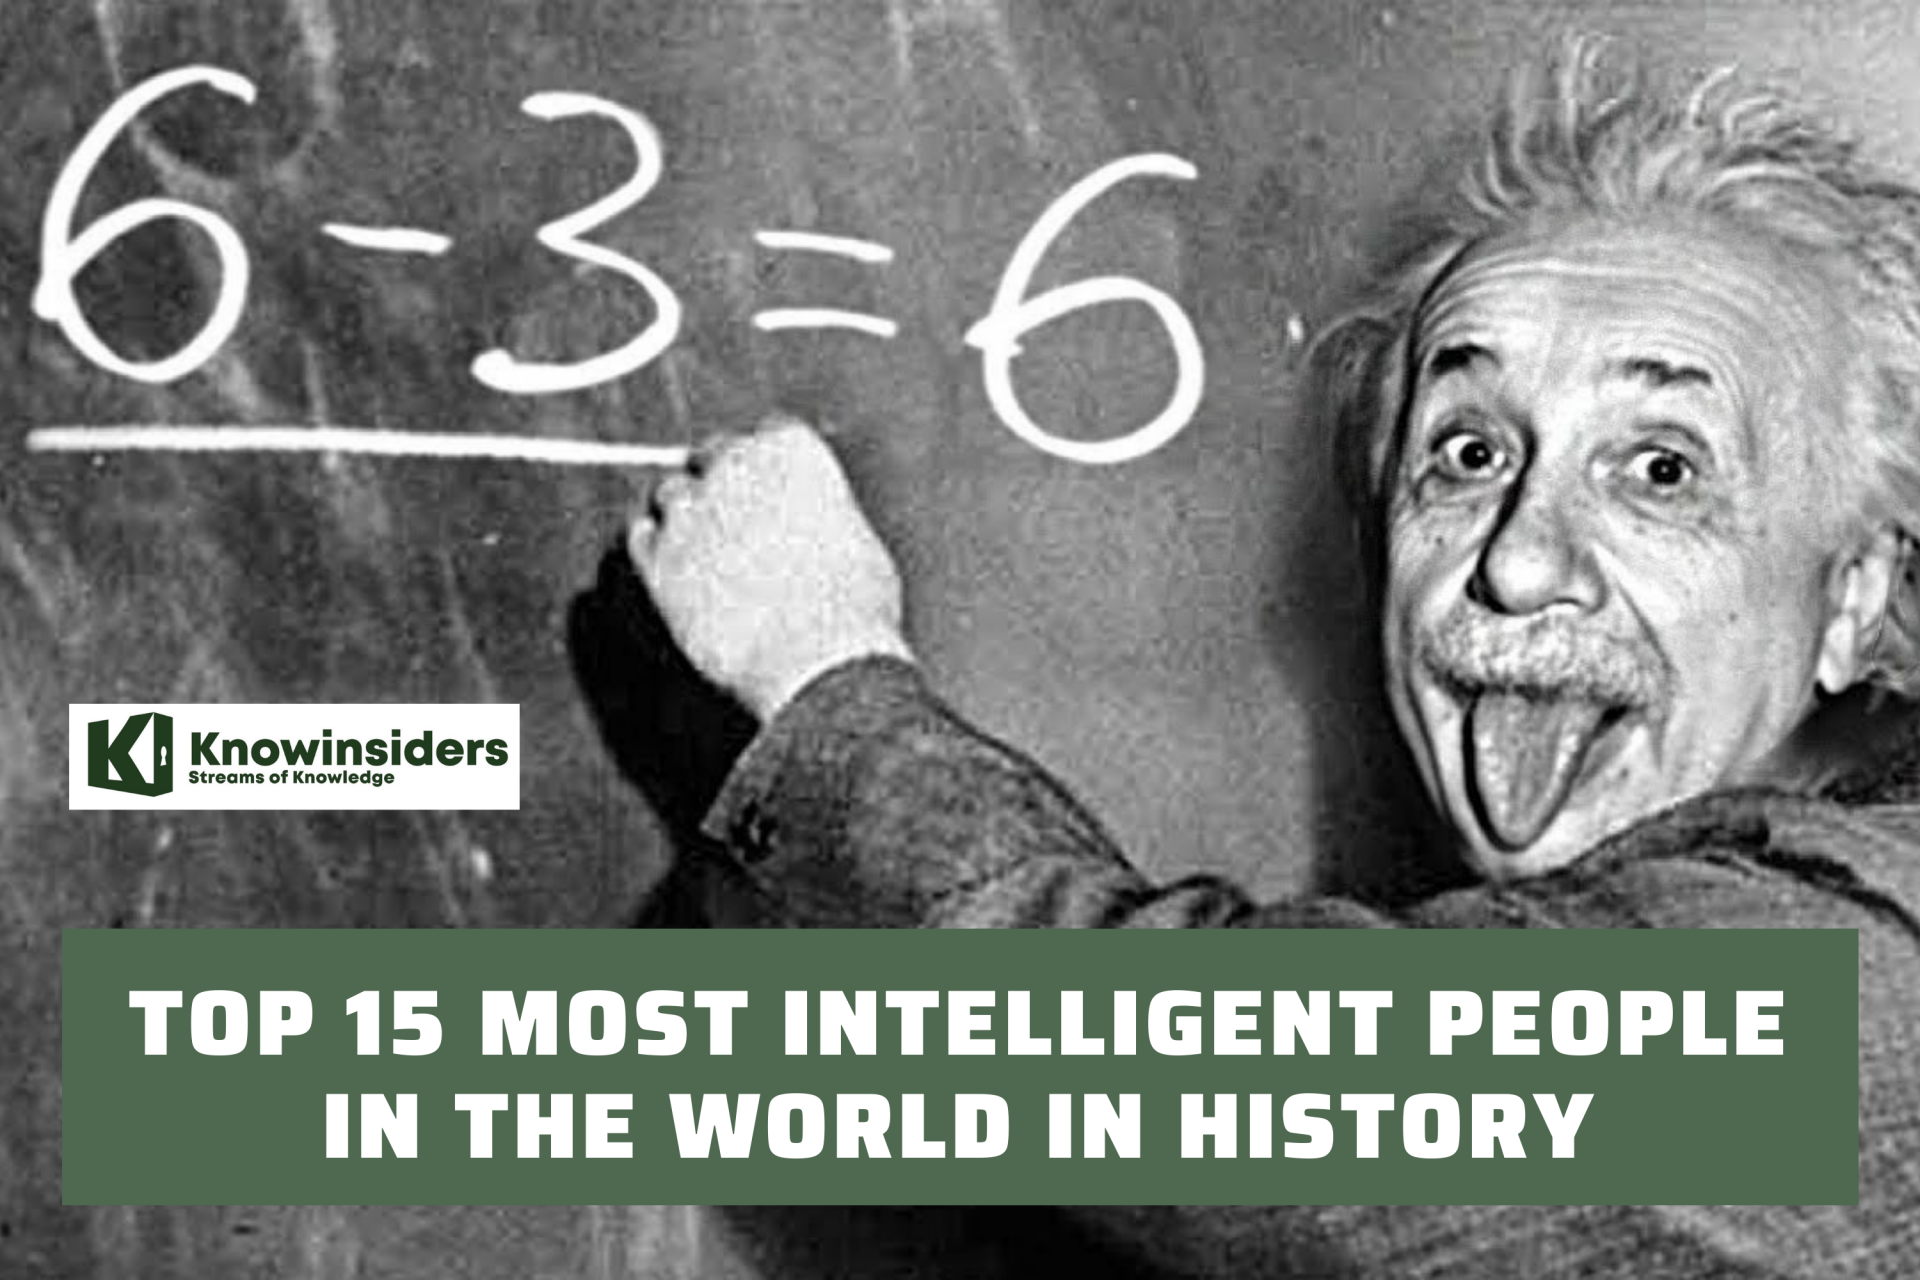 Top 15 Most Intelligent People in History of the World